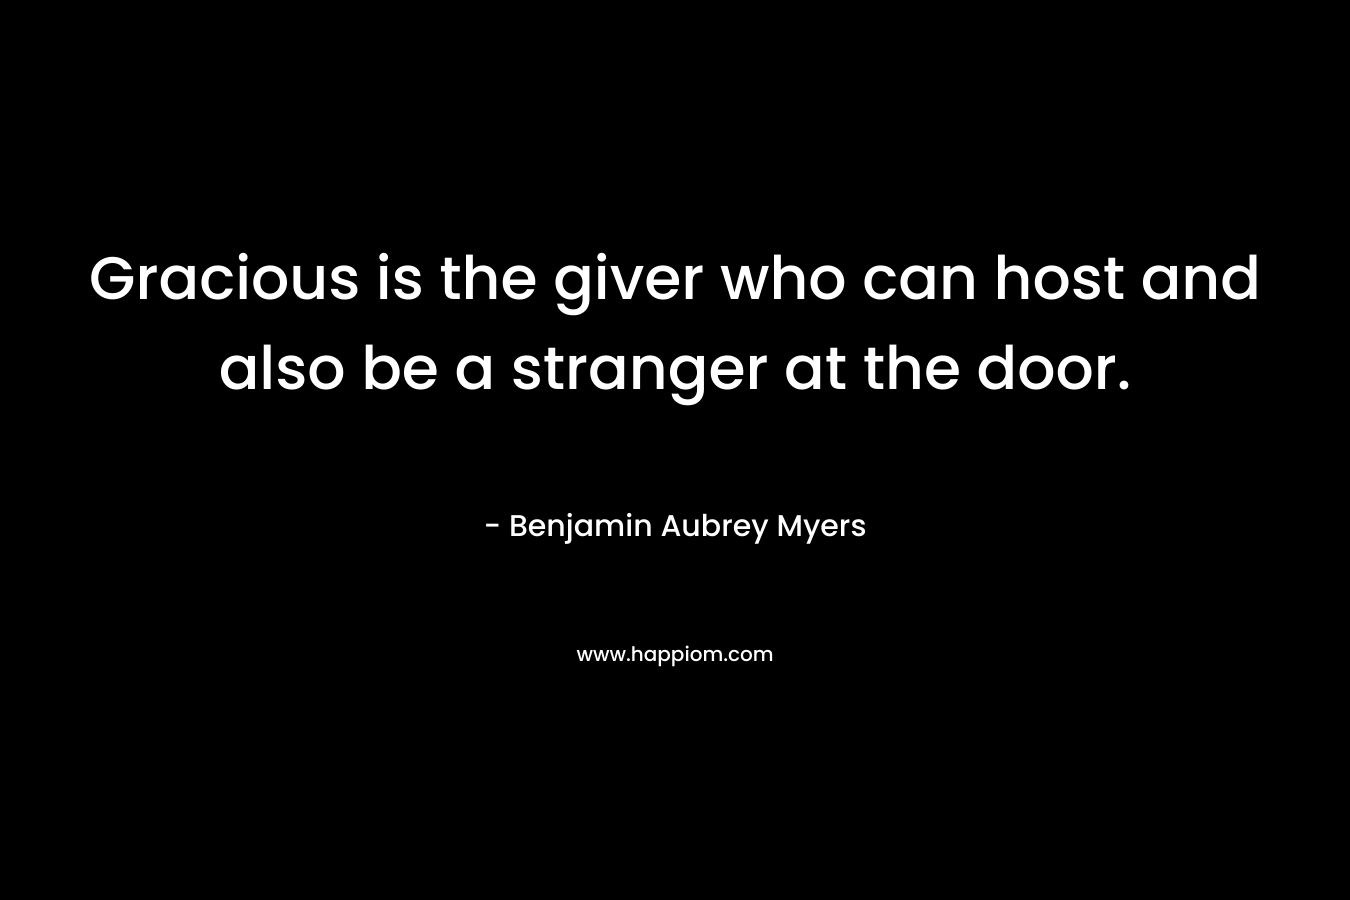 Gracious is the giver who can host and also be a stranger at the door. – Benjamin Aubrey Myers